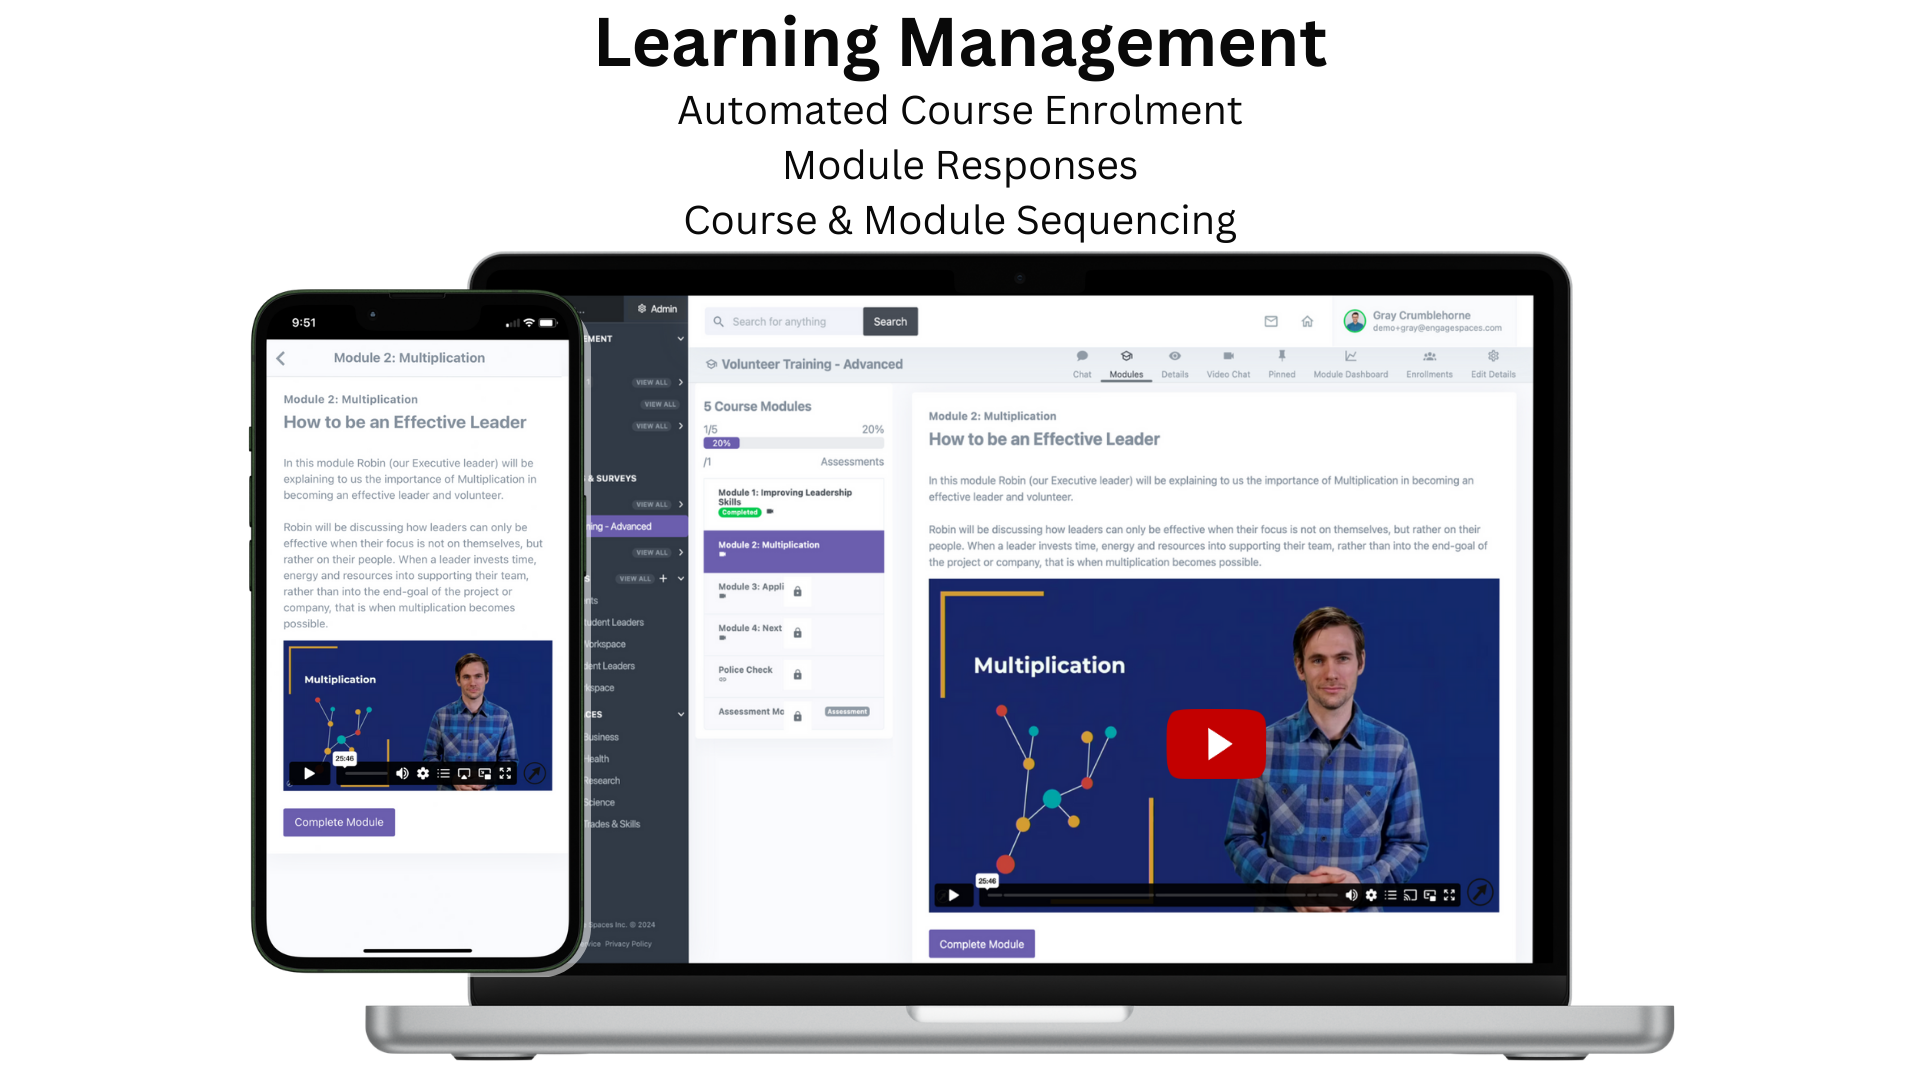 Teach your members with your custom videos. Create structured courses, and sequence your modules. Provide post-module reflections to encourage learning and to track understanding. Automate enrolment so that your Training can be optional or required.